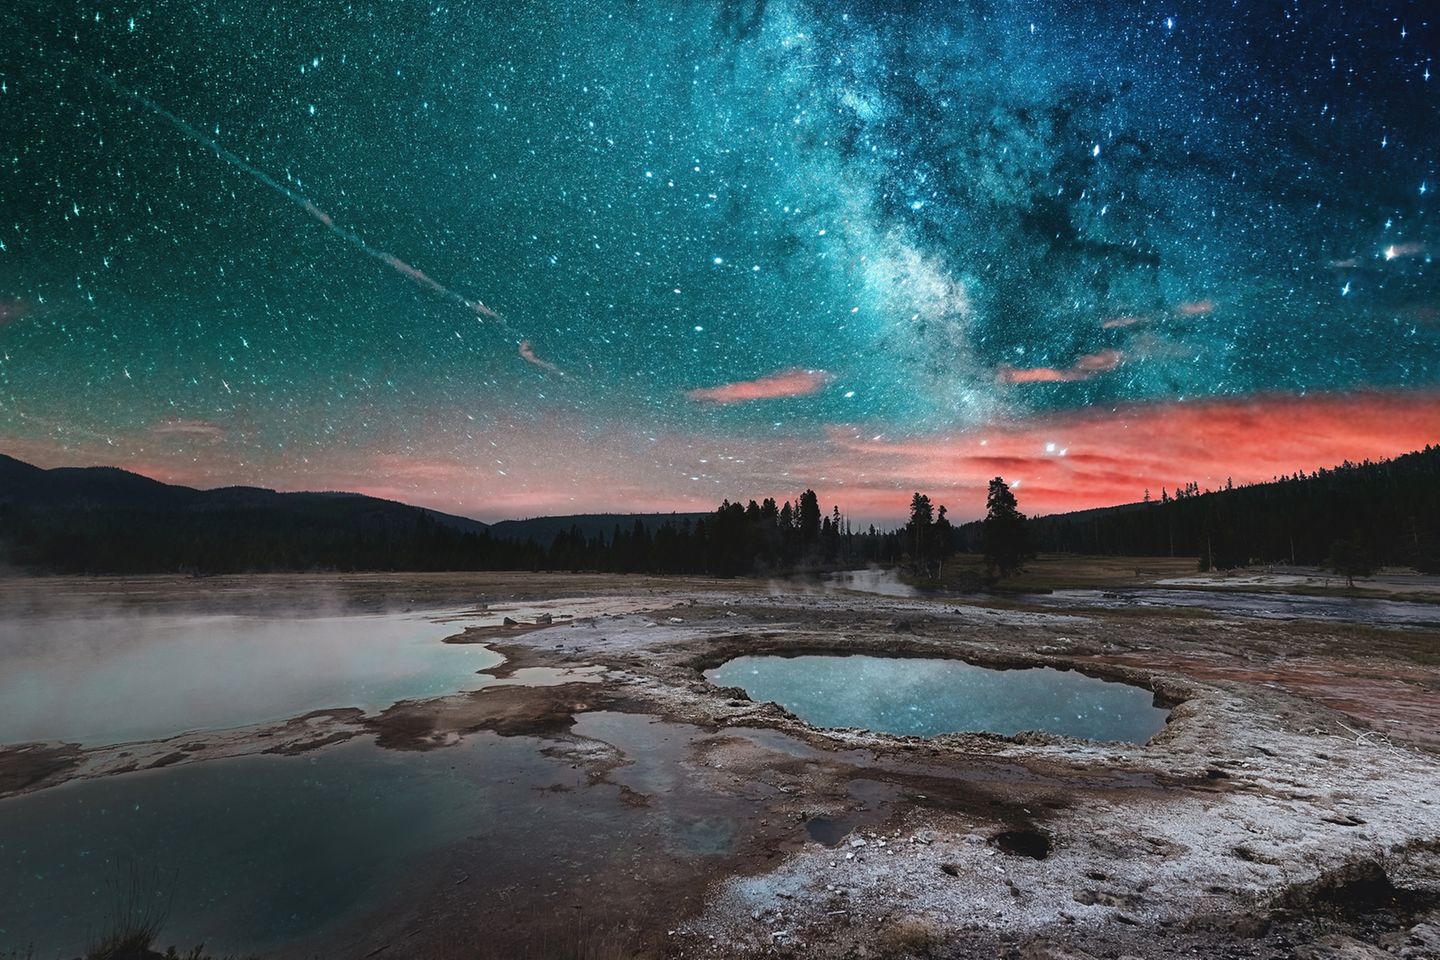 Image Name: Stars over Yellowstone  Photographer Name: Mazin Alhassan  Year: 2022  Image Description: <p>An astrophotography shot at the Norris Geyser Basin, the hottest geyser basin in Yellowstone. It is located near the northwest edge of Yellowstone Caldera near Norris Junction and on the intersection of three major faults.</p>  Copyright: © Mazin Alhassan, Saudi Arabia, Winner, National Awards, Landscape, 2022 Sony World Photography Awards